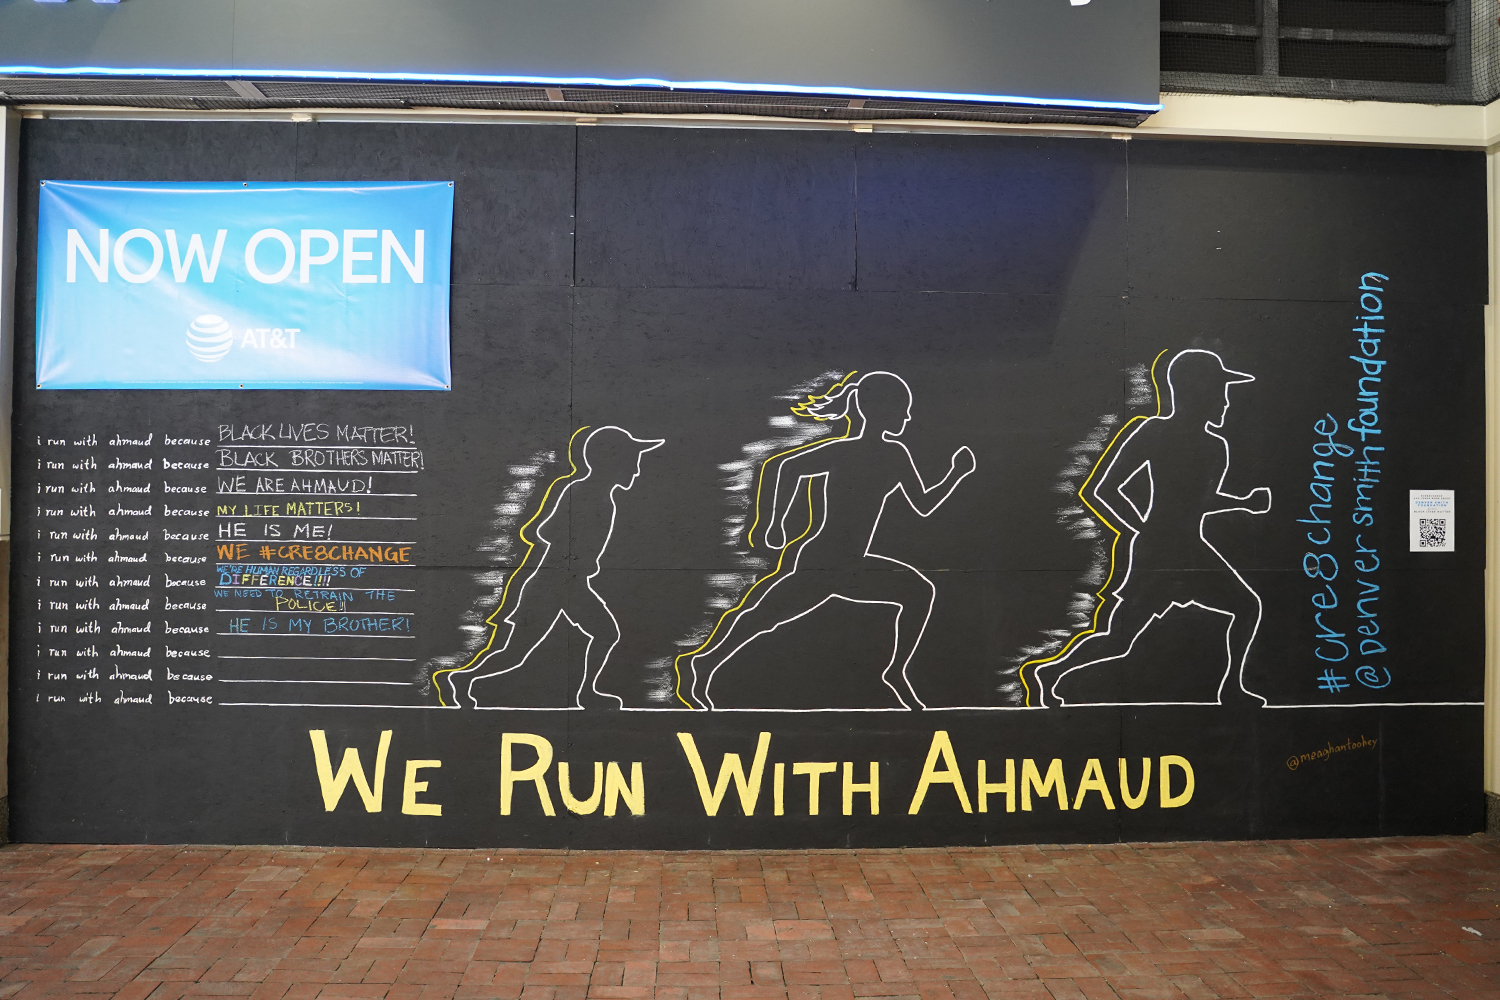 Gallery Place Murals 2: We Run With Ahmaud, by Denver Smith Foundation